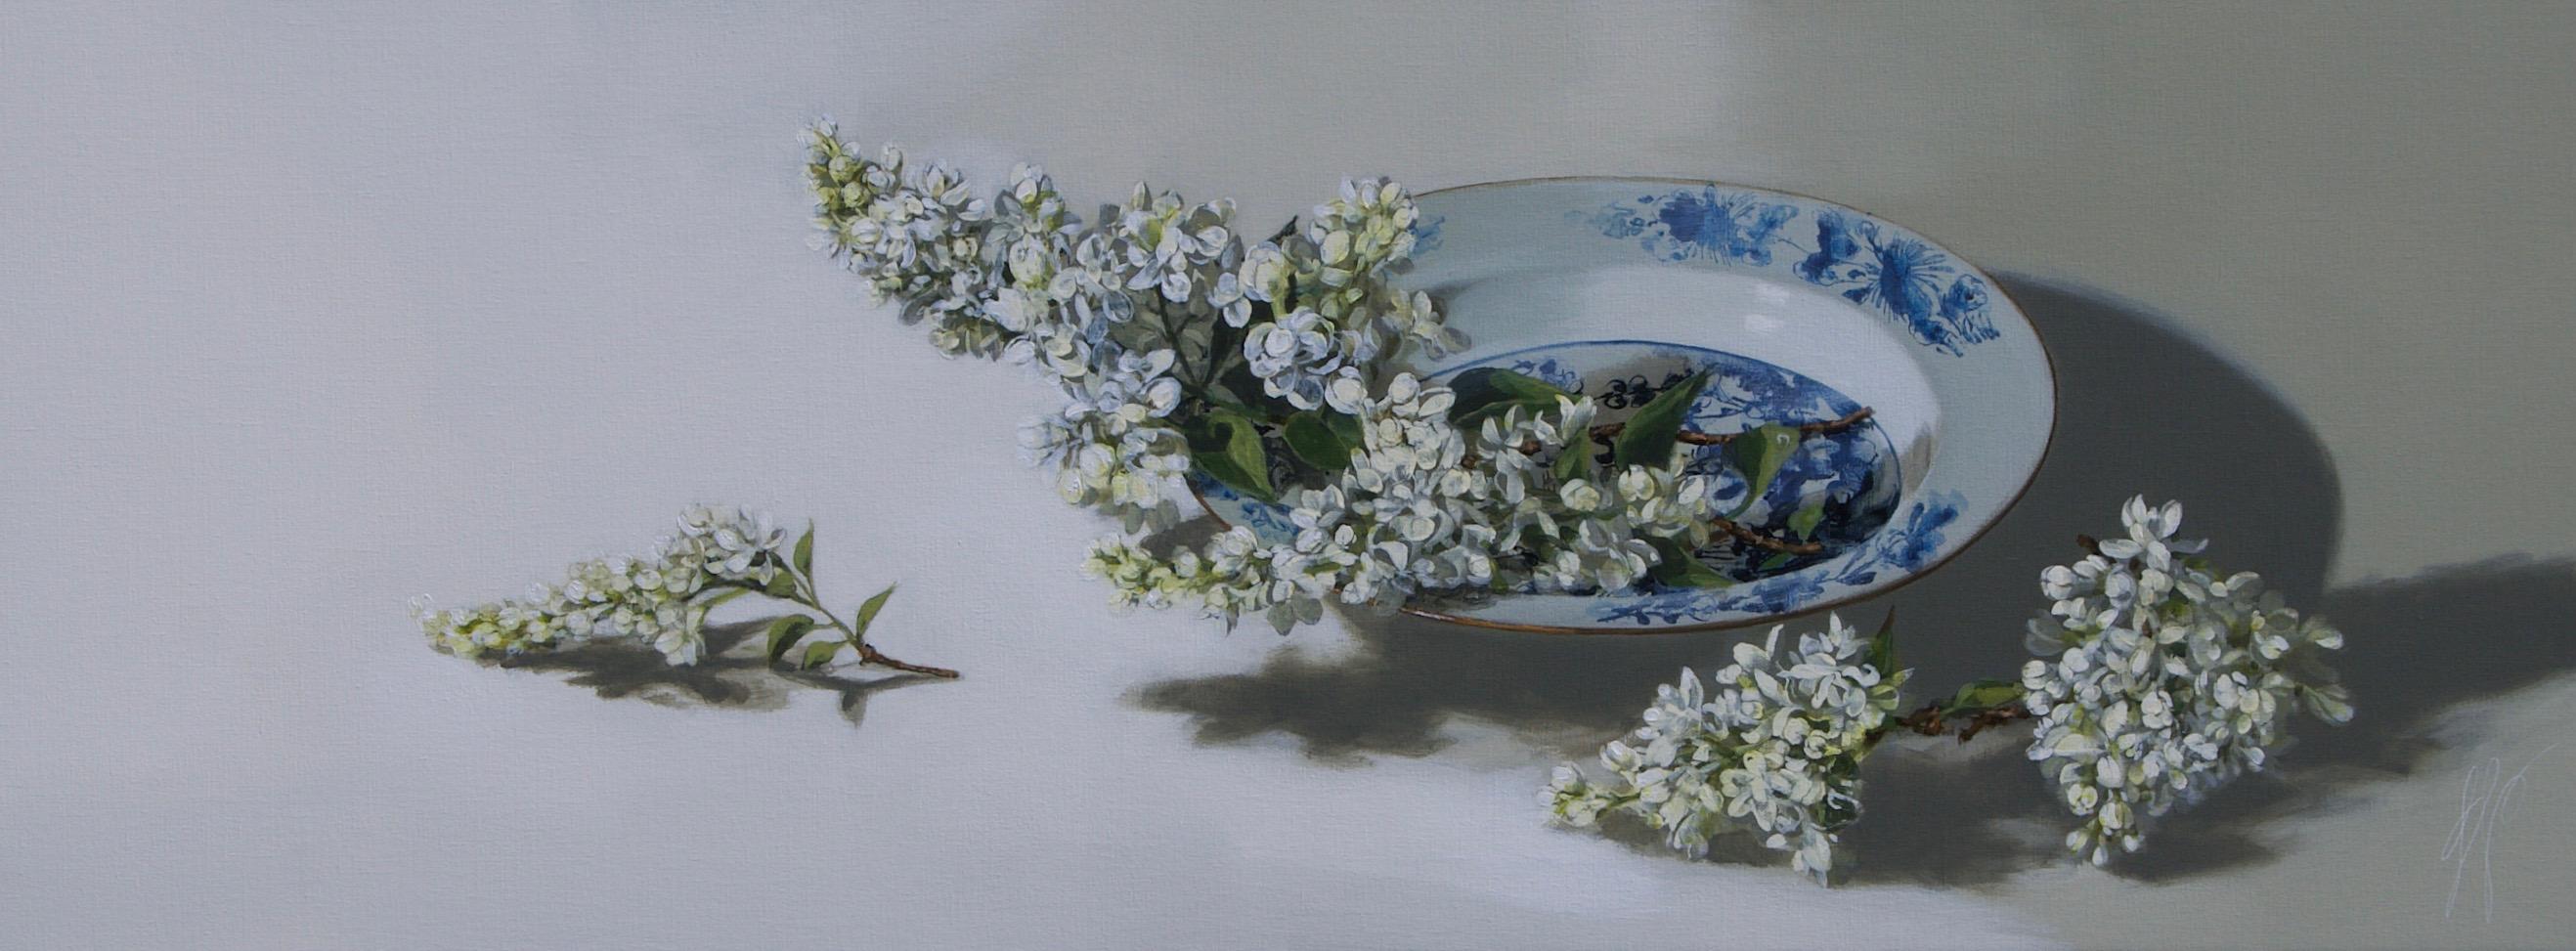 Sasja Wagenaar Figurative Painting - ''Lilacs'' Contemporary Dutch Still-Life of Chinese Porcelain Plate and Lilacs